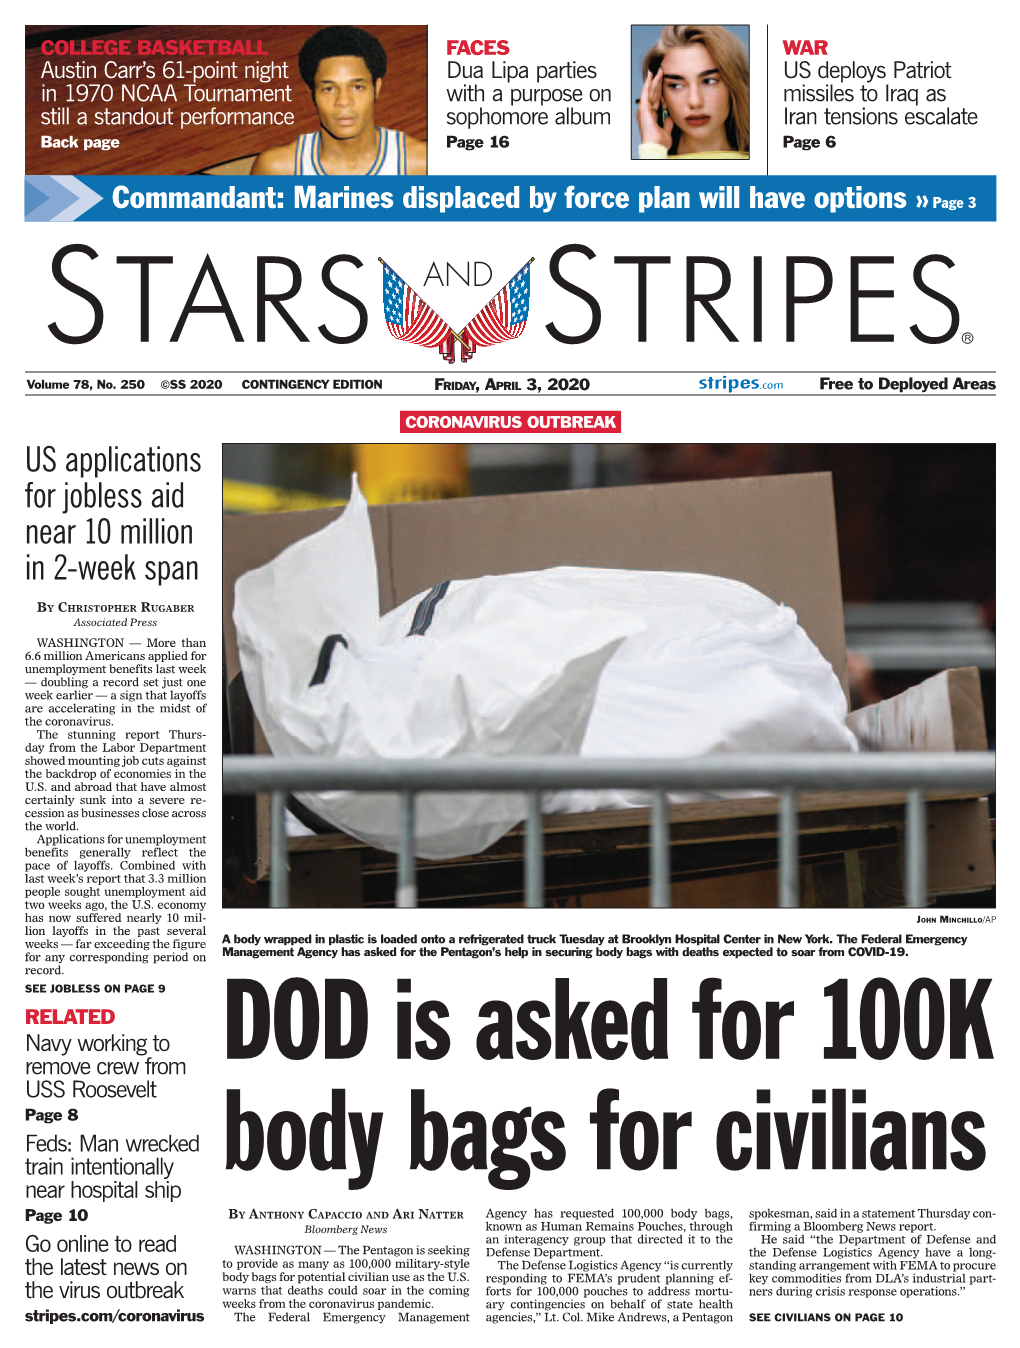 DOD Is Asked for 100K Body Bags for Civilians